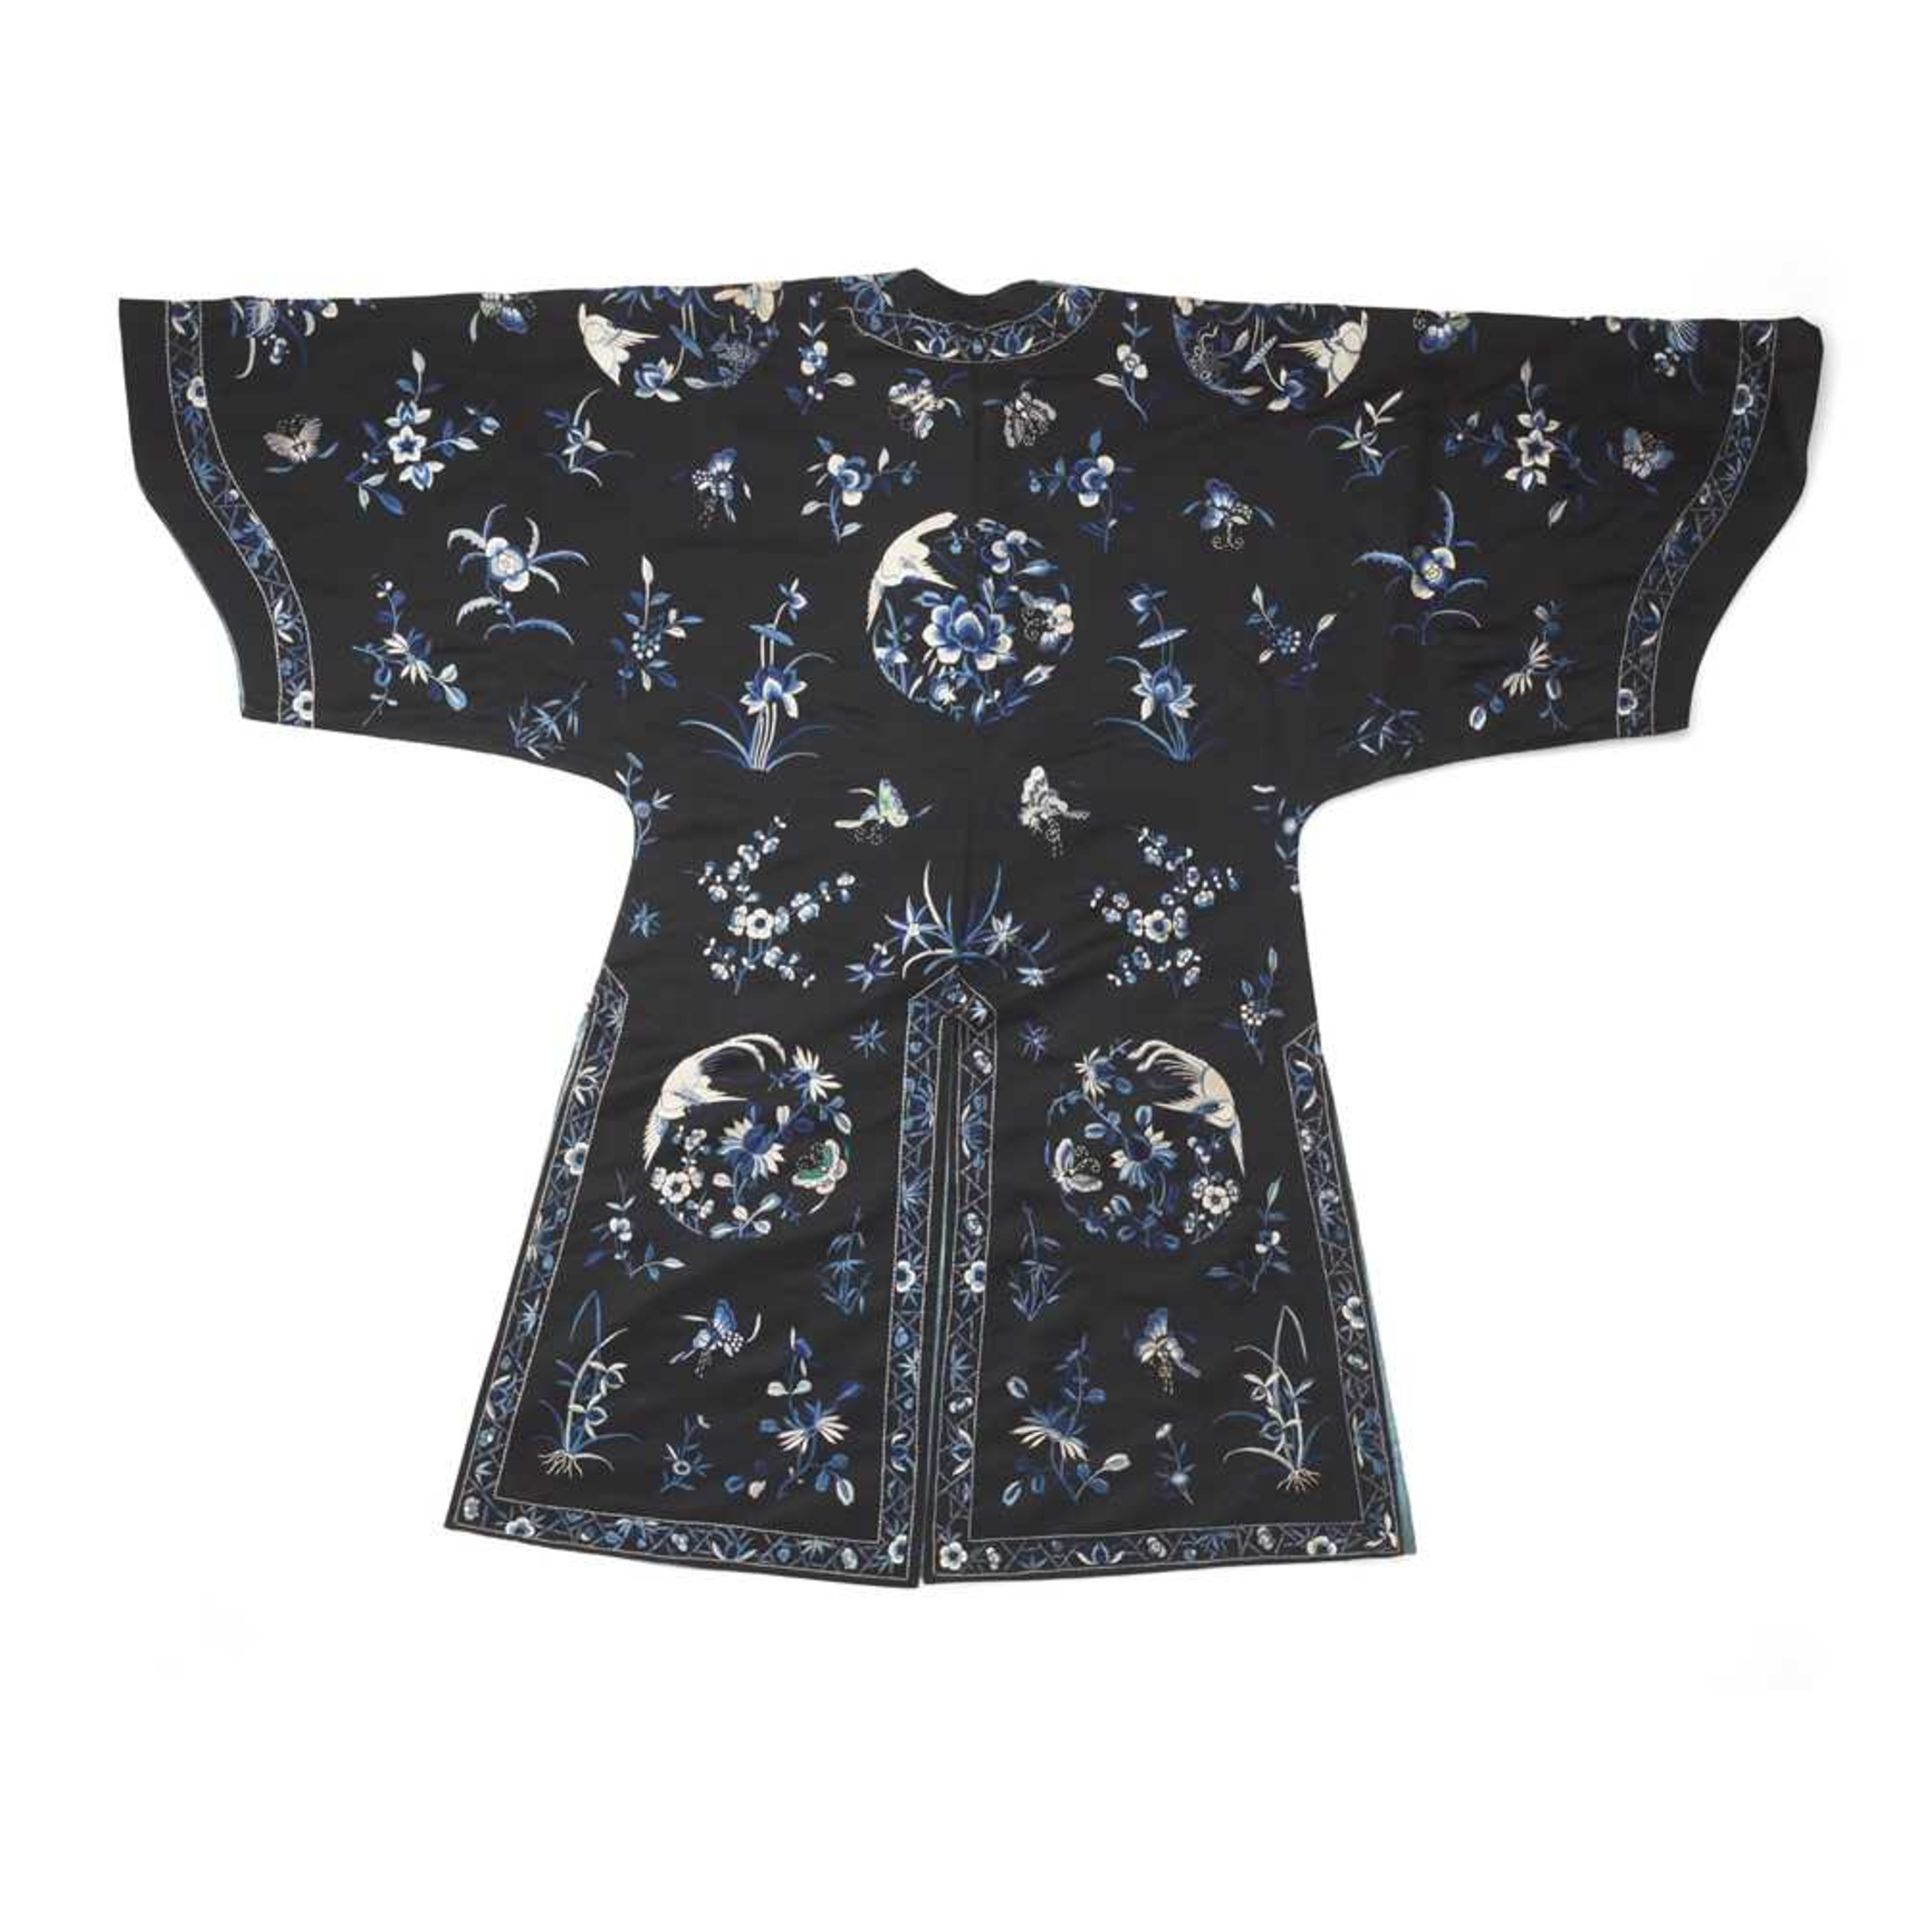 BLACK-GROUND SILK EMBROIDERED LADY'S OVERCOAT LATE QING DYNASTY-REPUBLIC PERIOD, 19TH-20TH CENTURY - Bild 2 aus 17